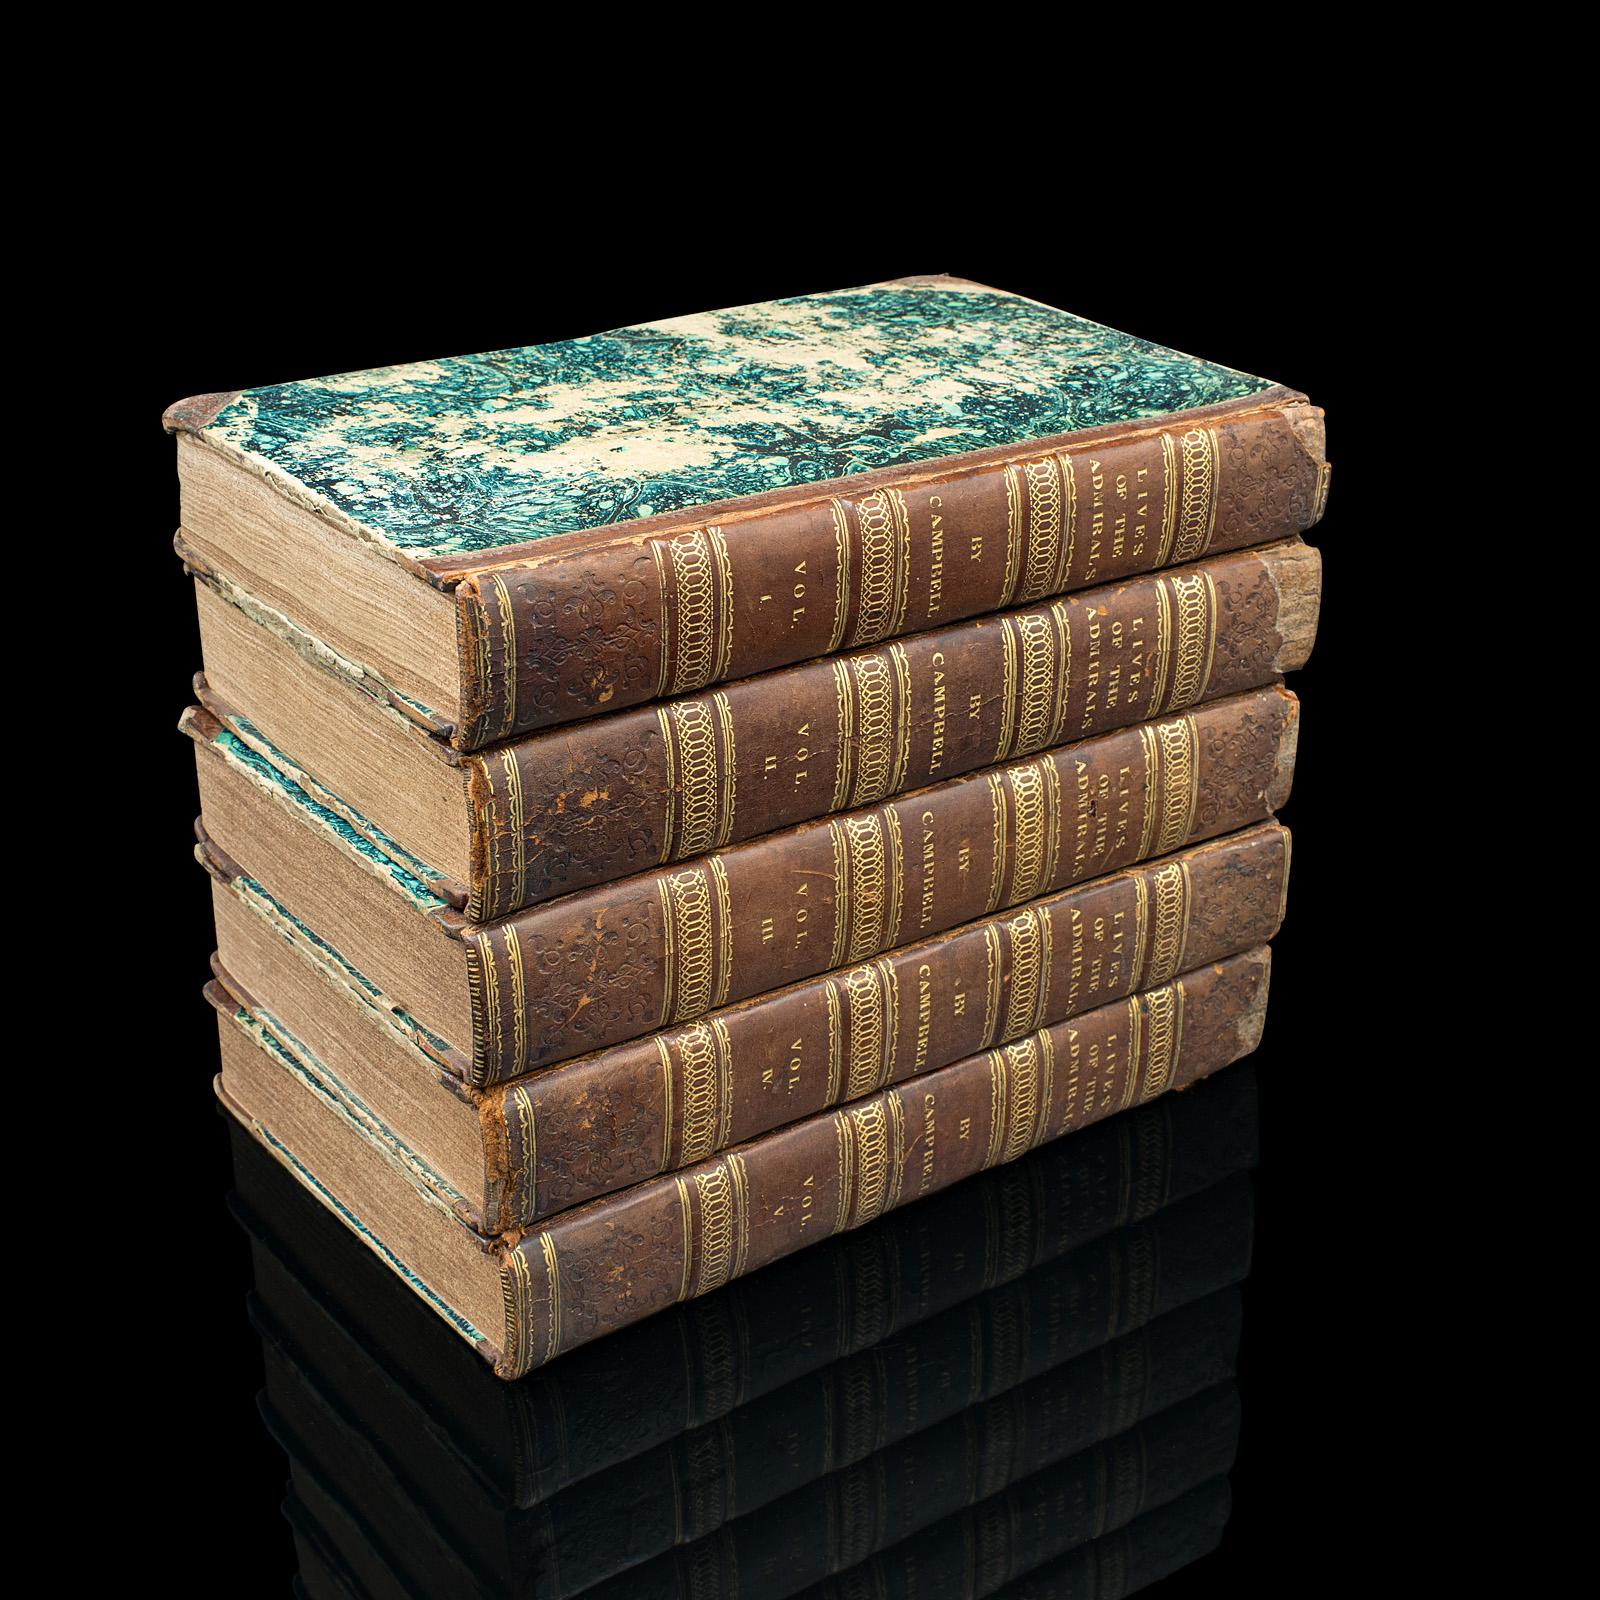 This is a set of 5 antique volumes, Lives of the British Admirals by Dr John Campbell et al. An English language, hard bound naval interest book, published in London, 1817.

Includes the original 4 volumes by Scottish historian Dr. John Campbell,